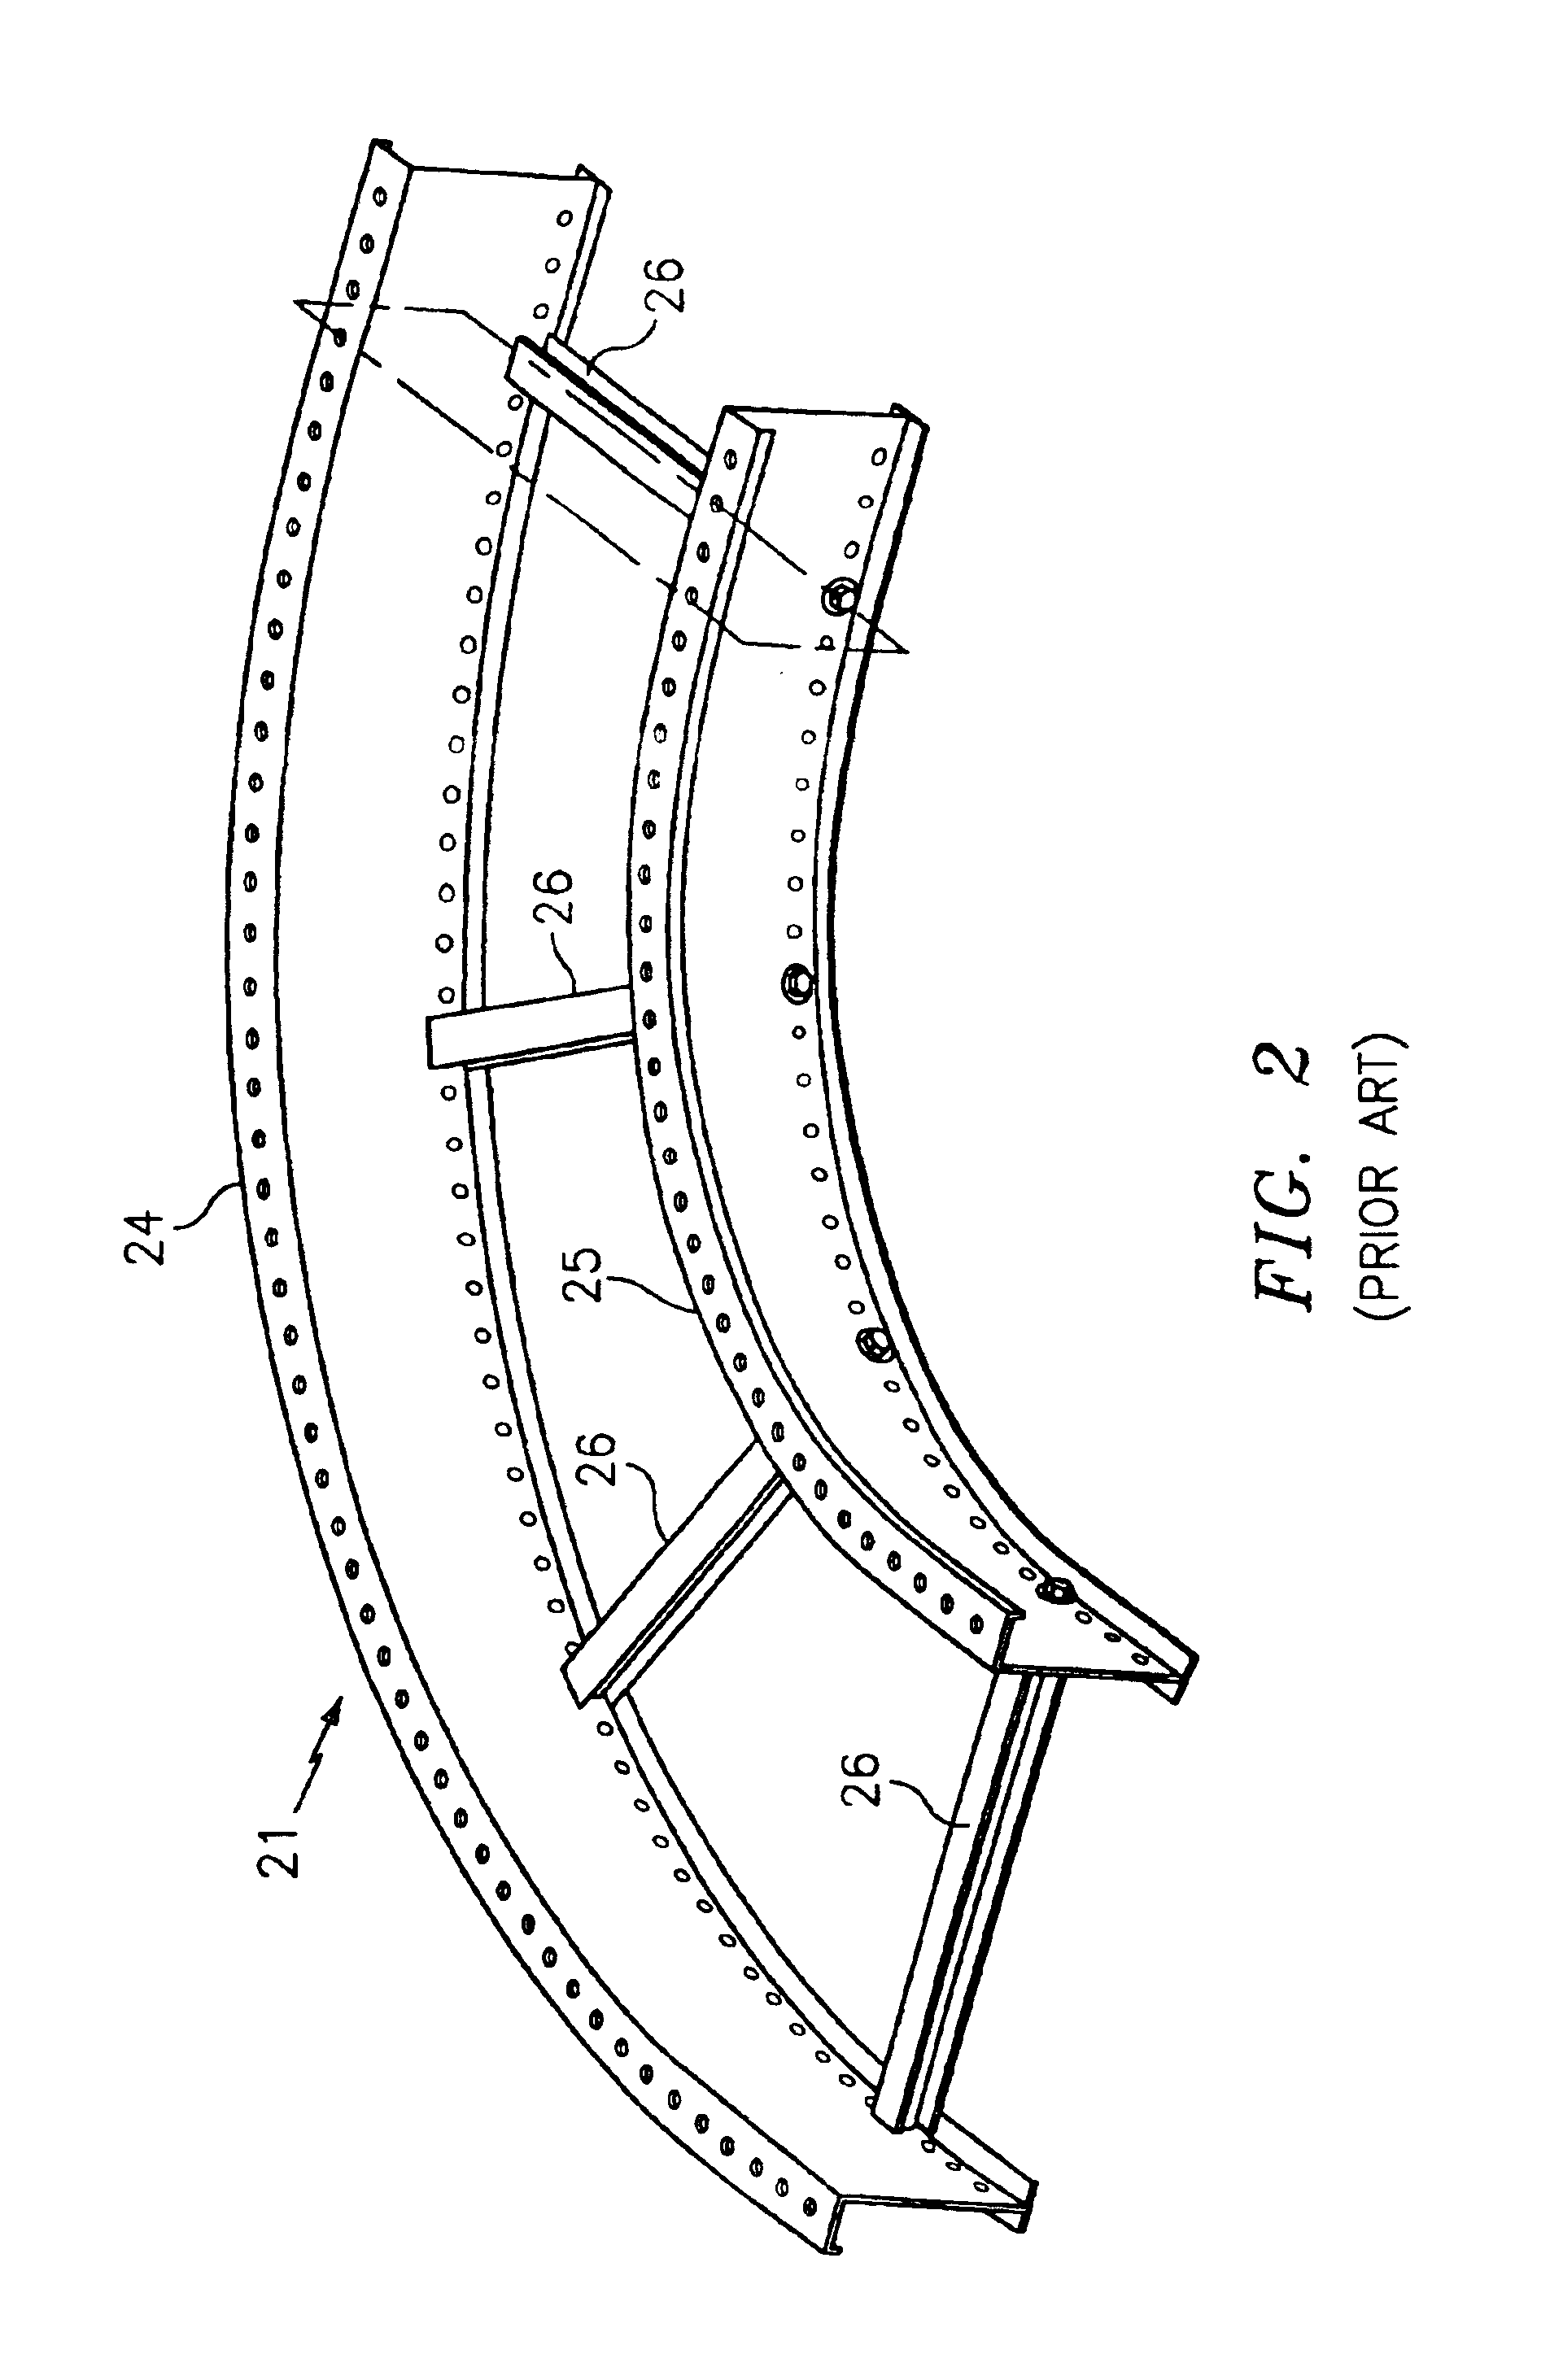 Cable tray apparatus and method